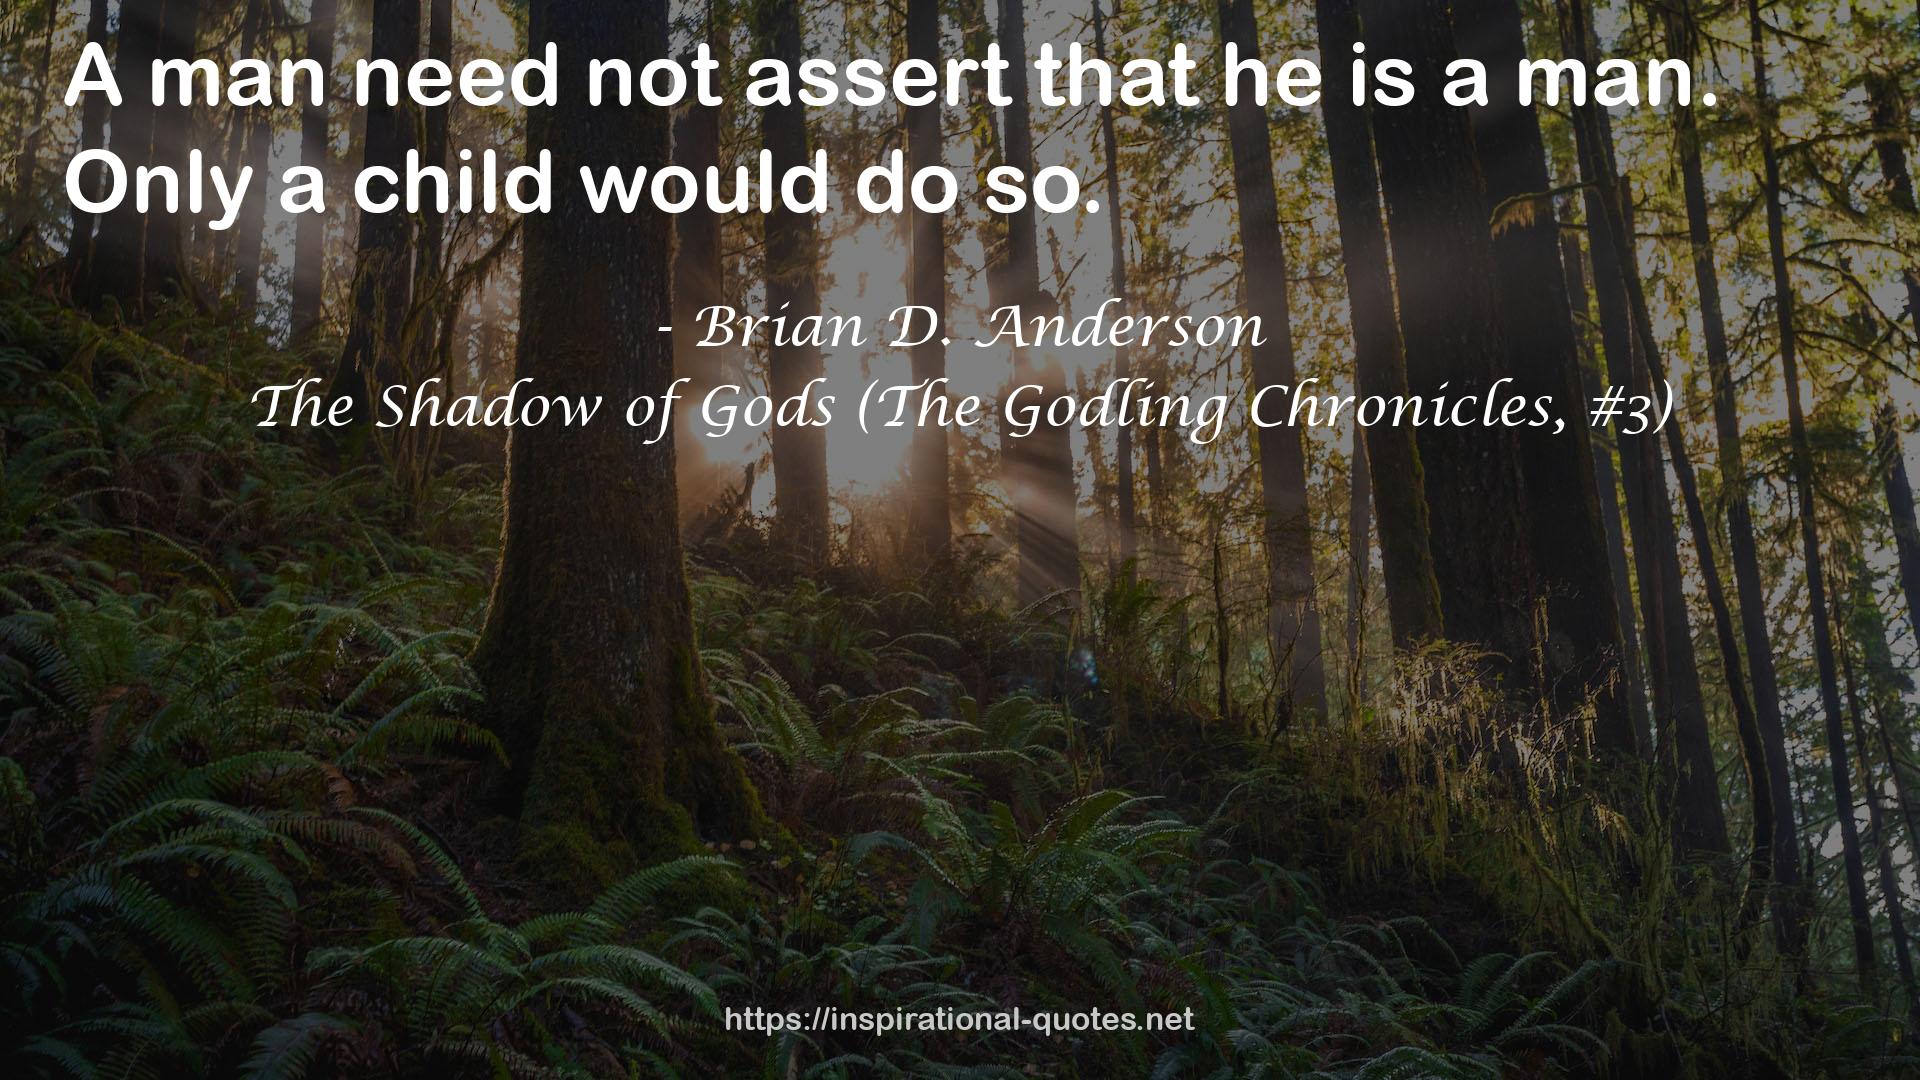 The Shadow of Gods (The Godling Chronicles, #3) QUOTES